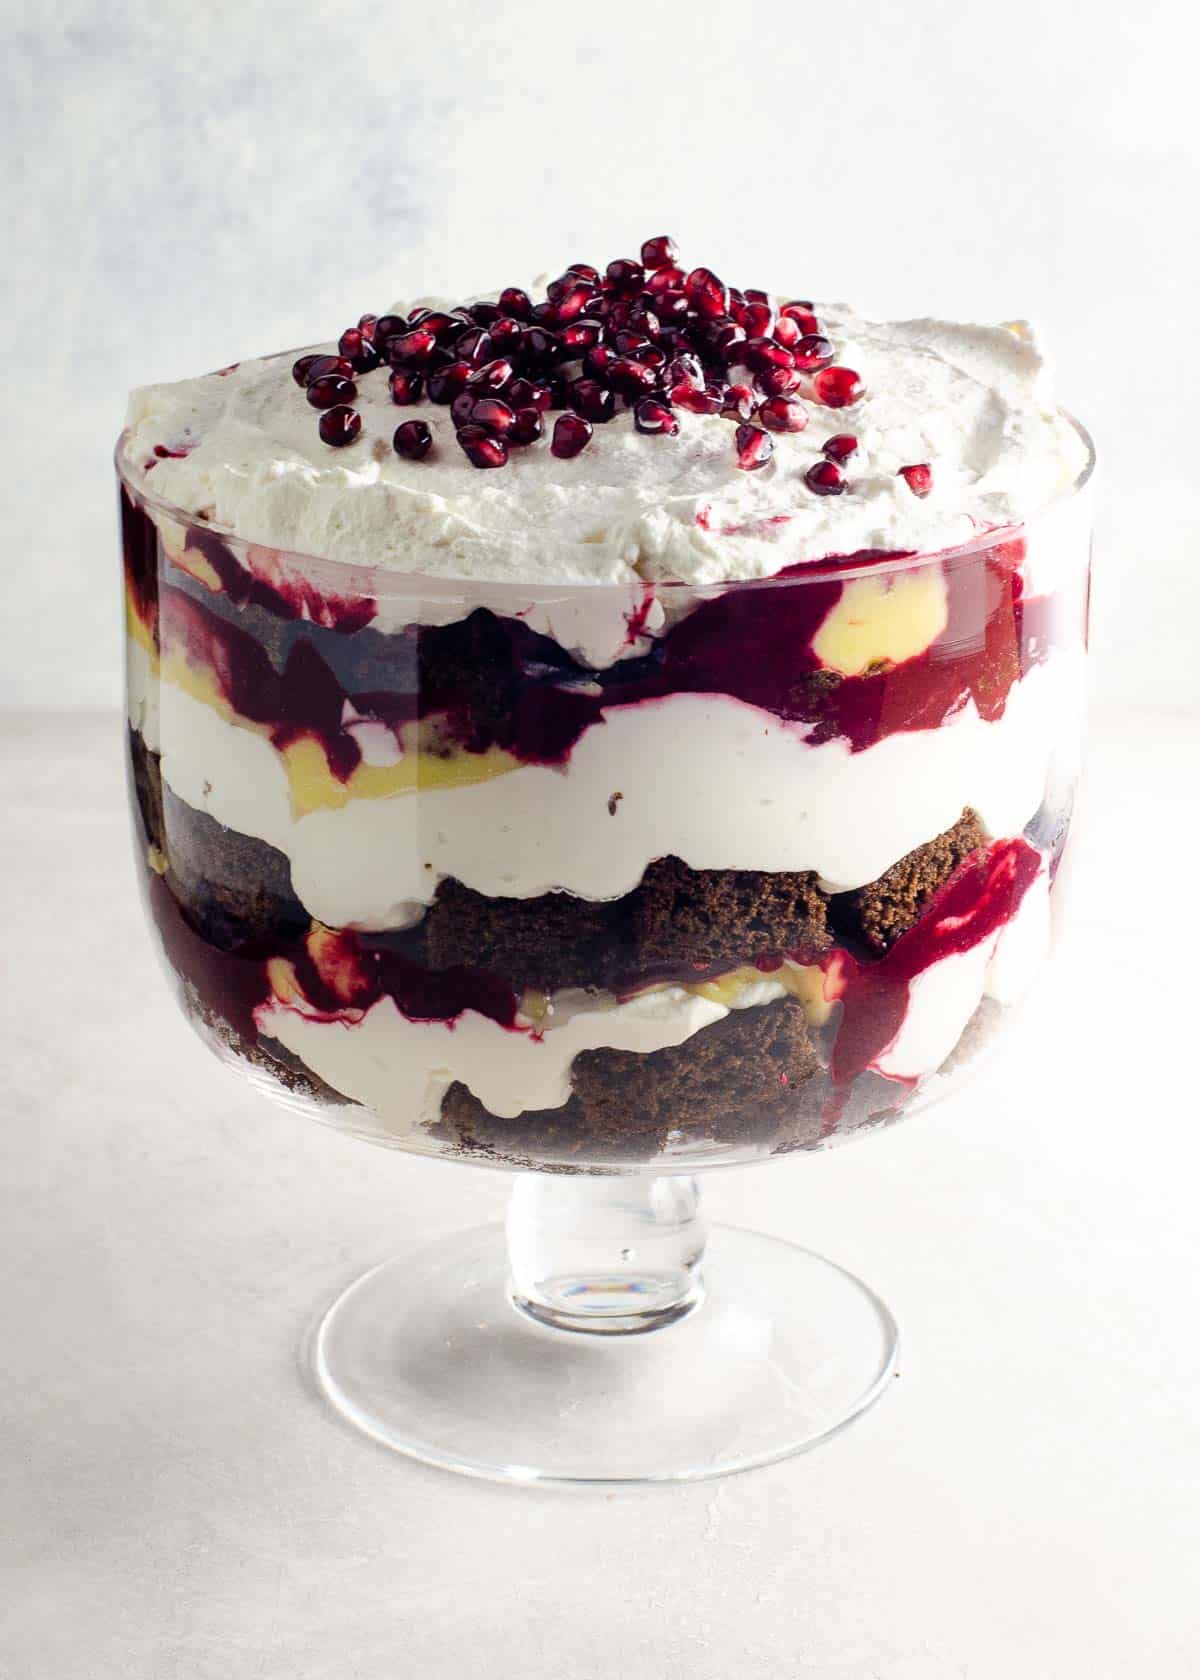 gingerbread trifle with lemon curd, blackberry sauce, and whipped cream in a trifle bowl